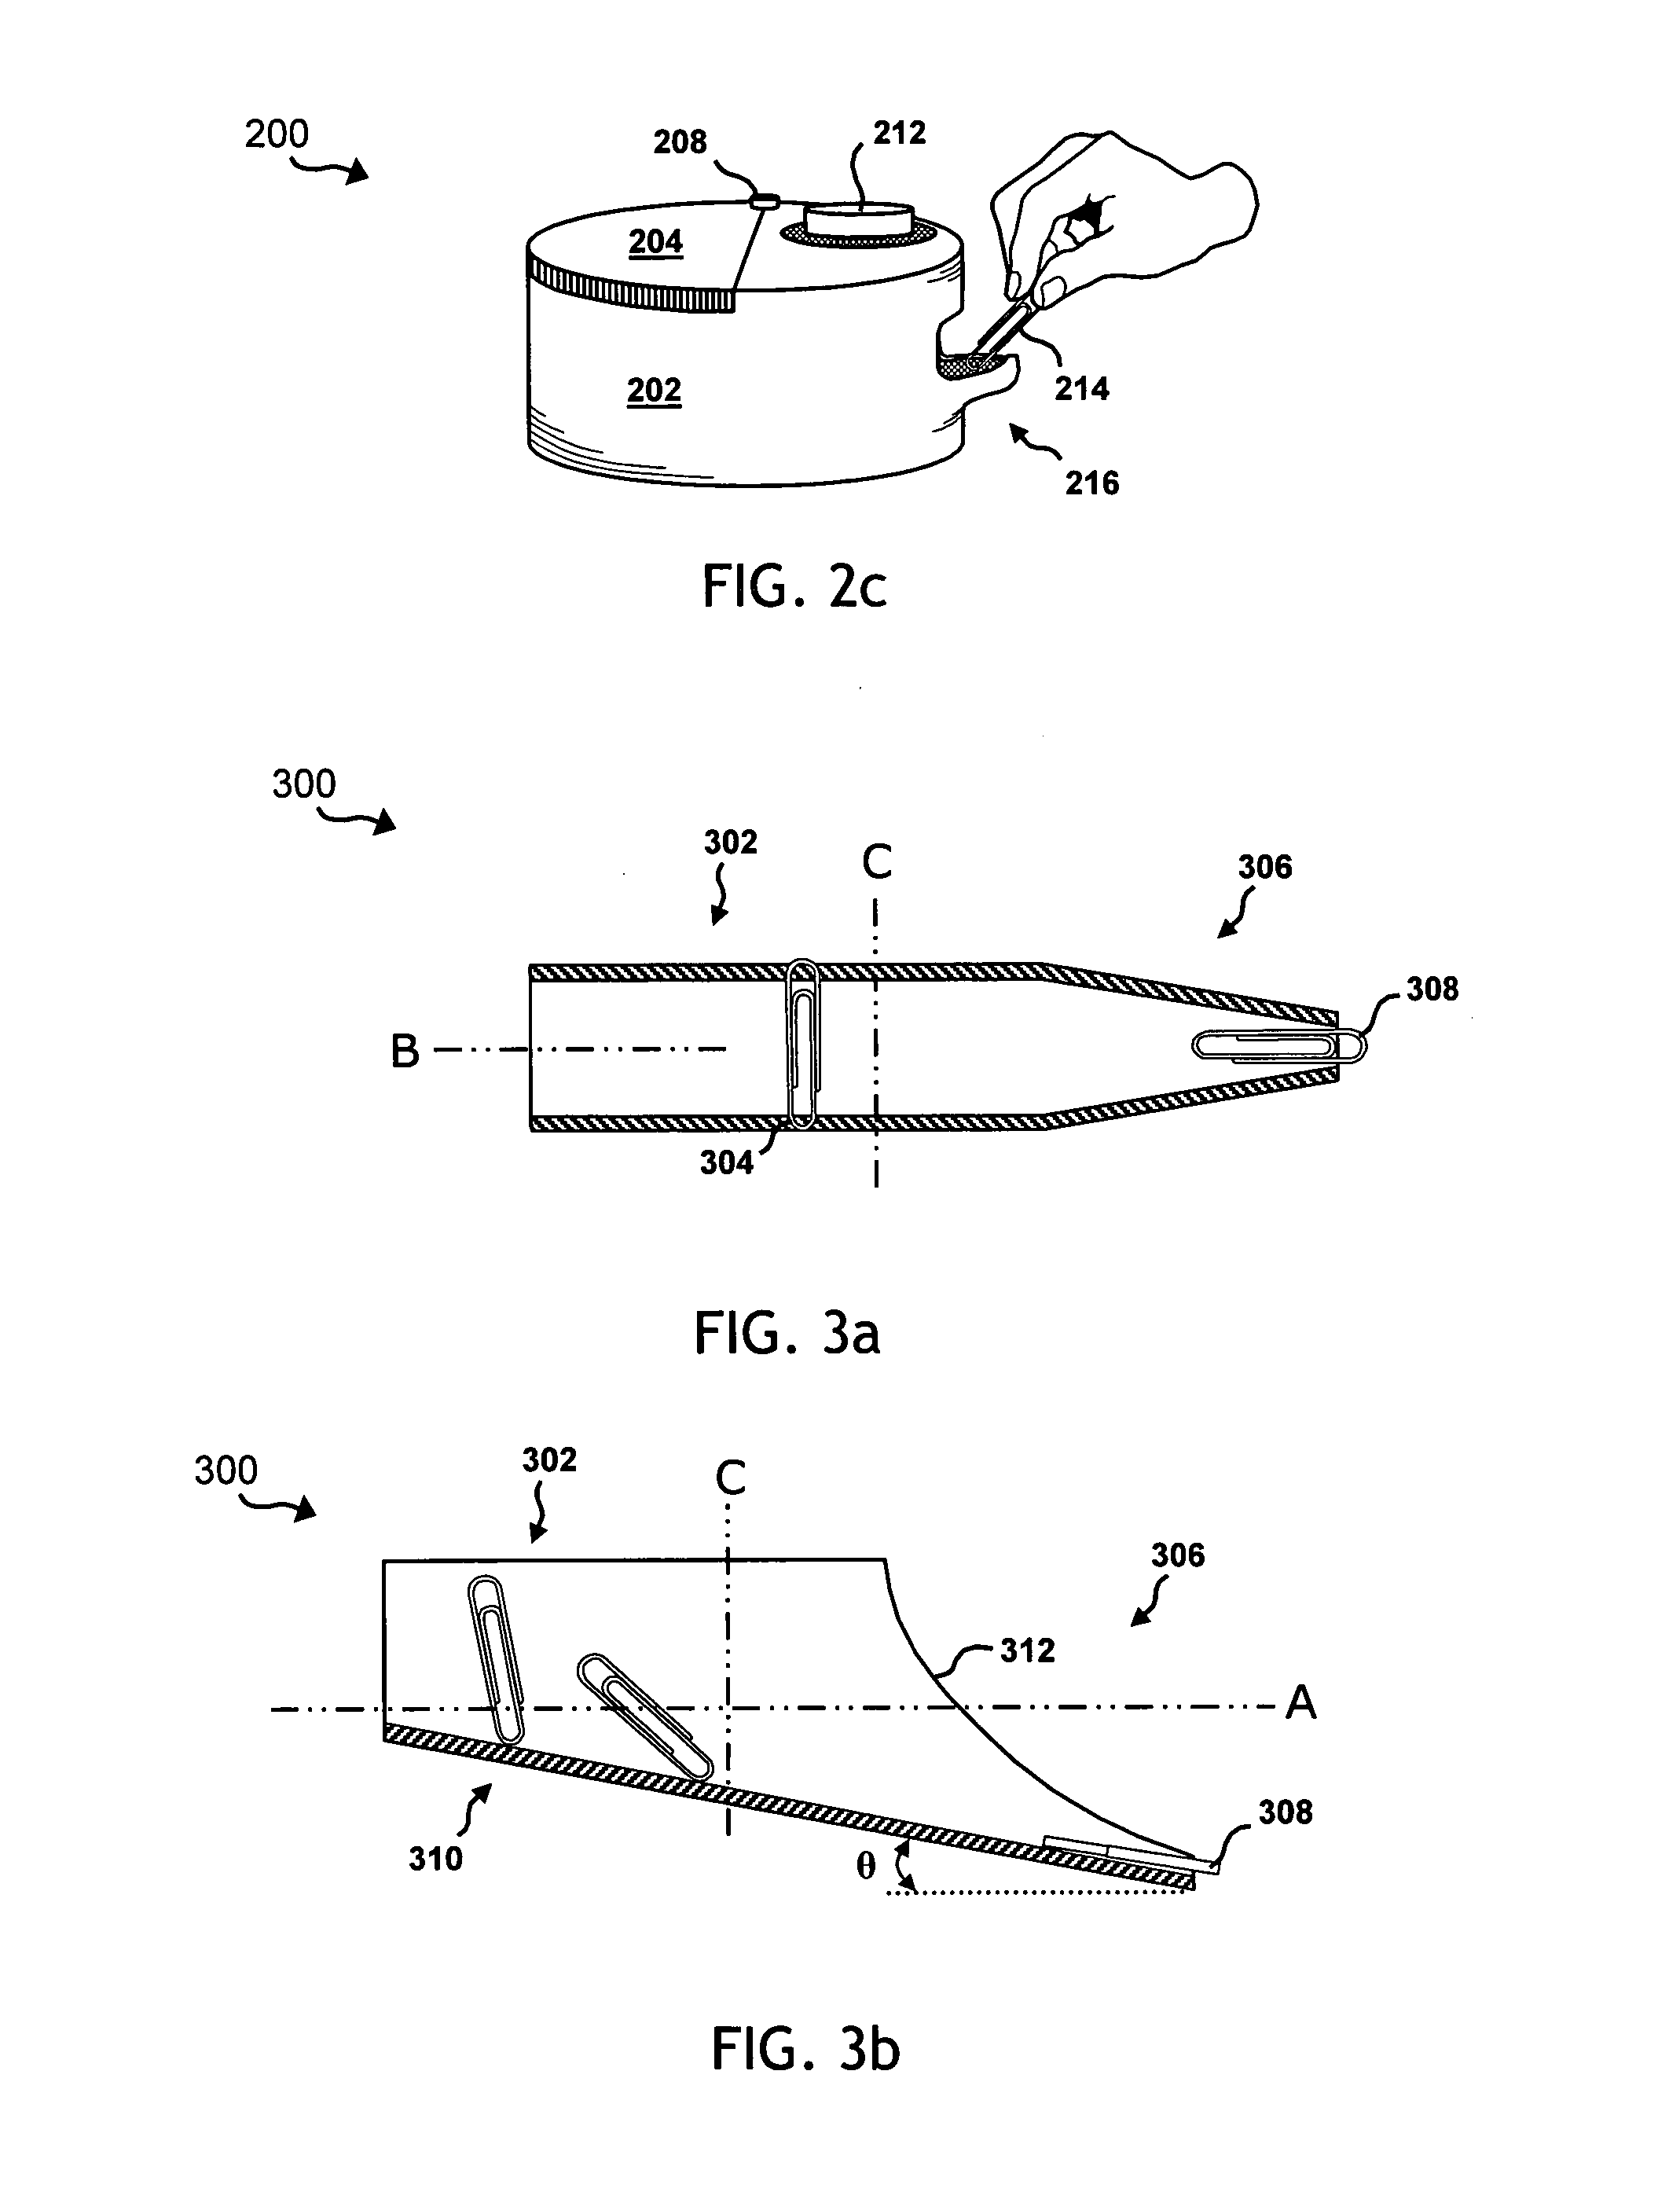 System for storing and dispensing paper clips